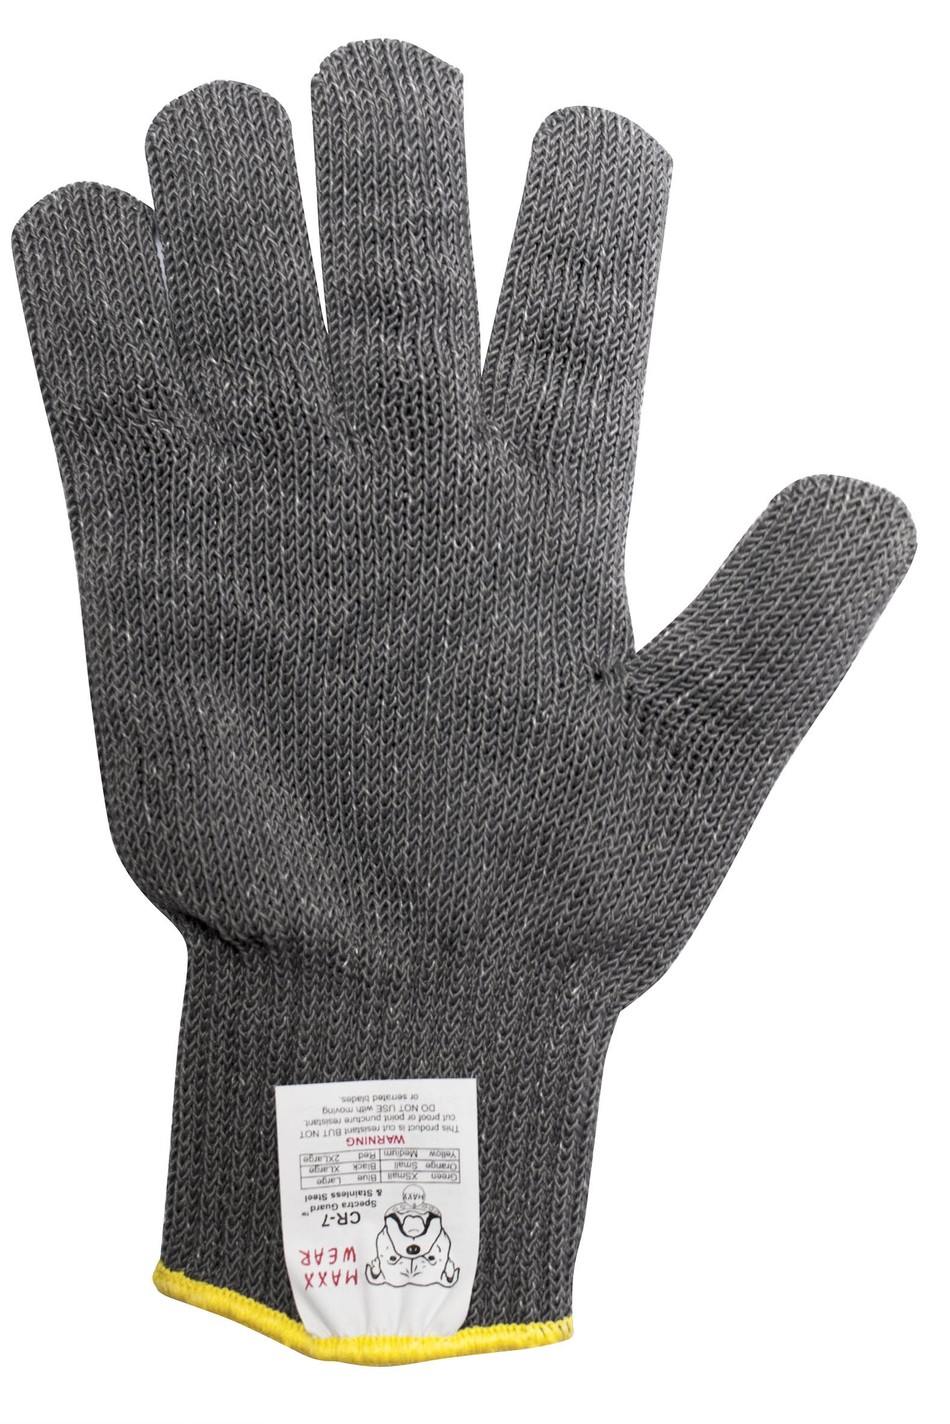 https://www.russums-shop.co.uk/imgs/products/uk/950_constW/KT125~grey-safety-glove_P1.jpg